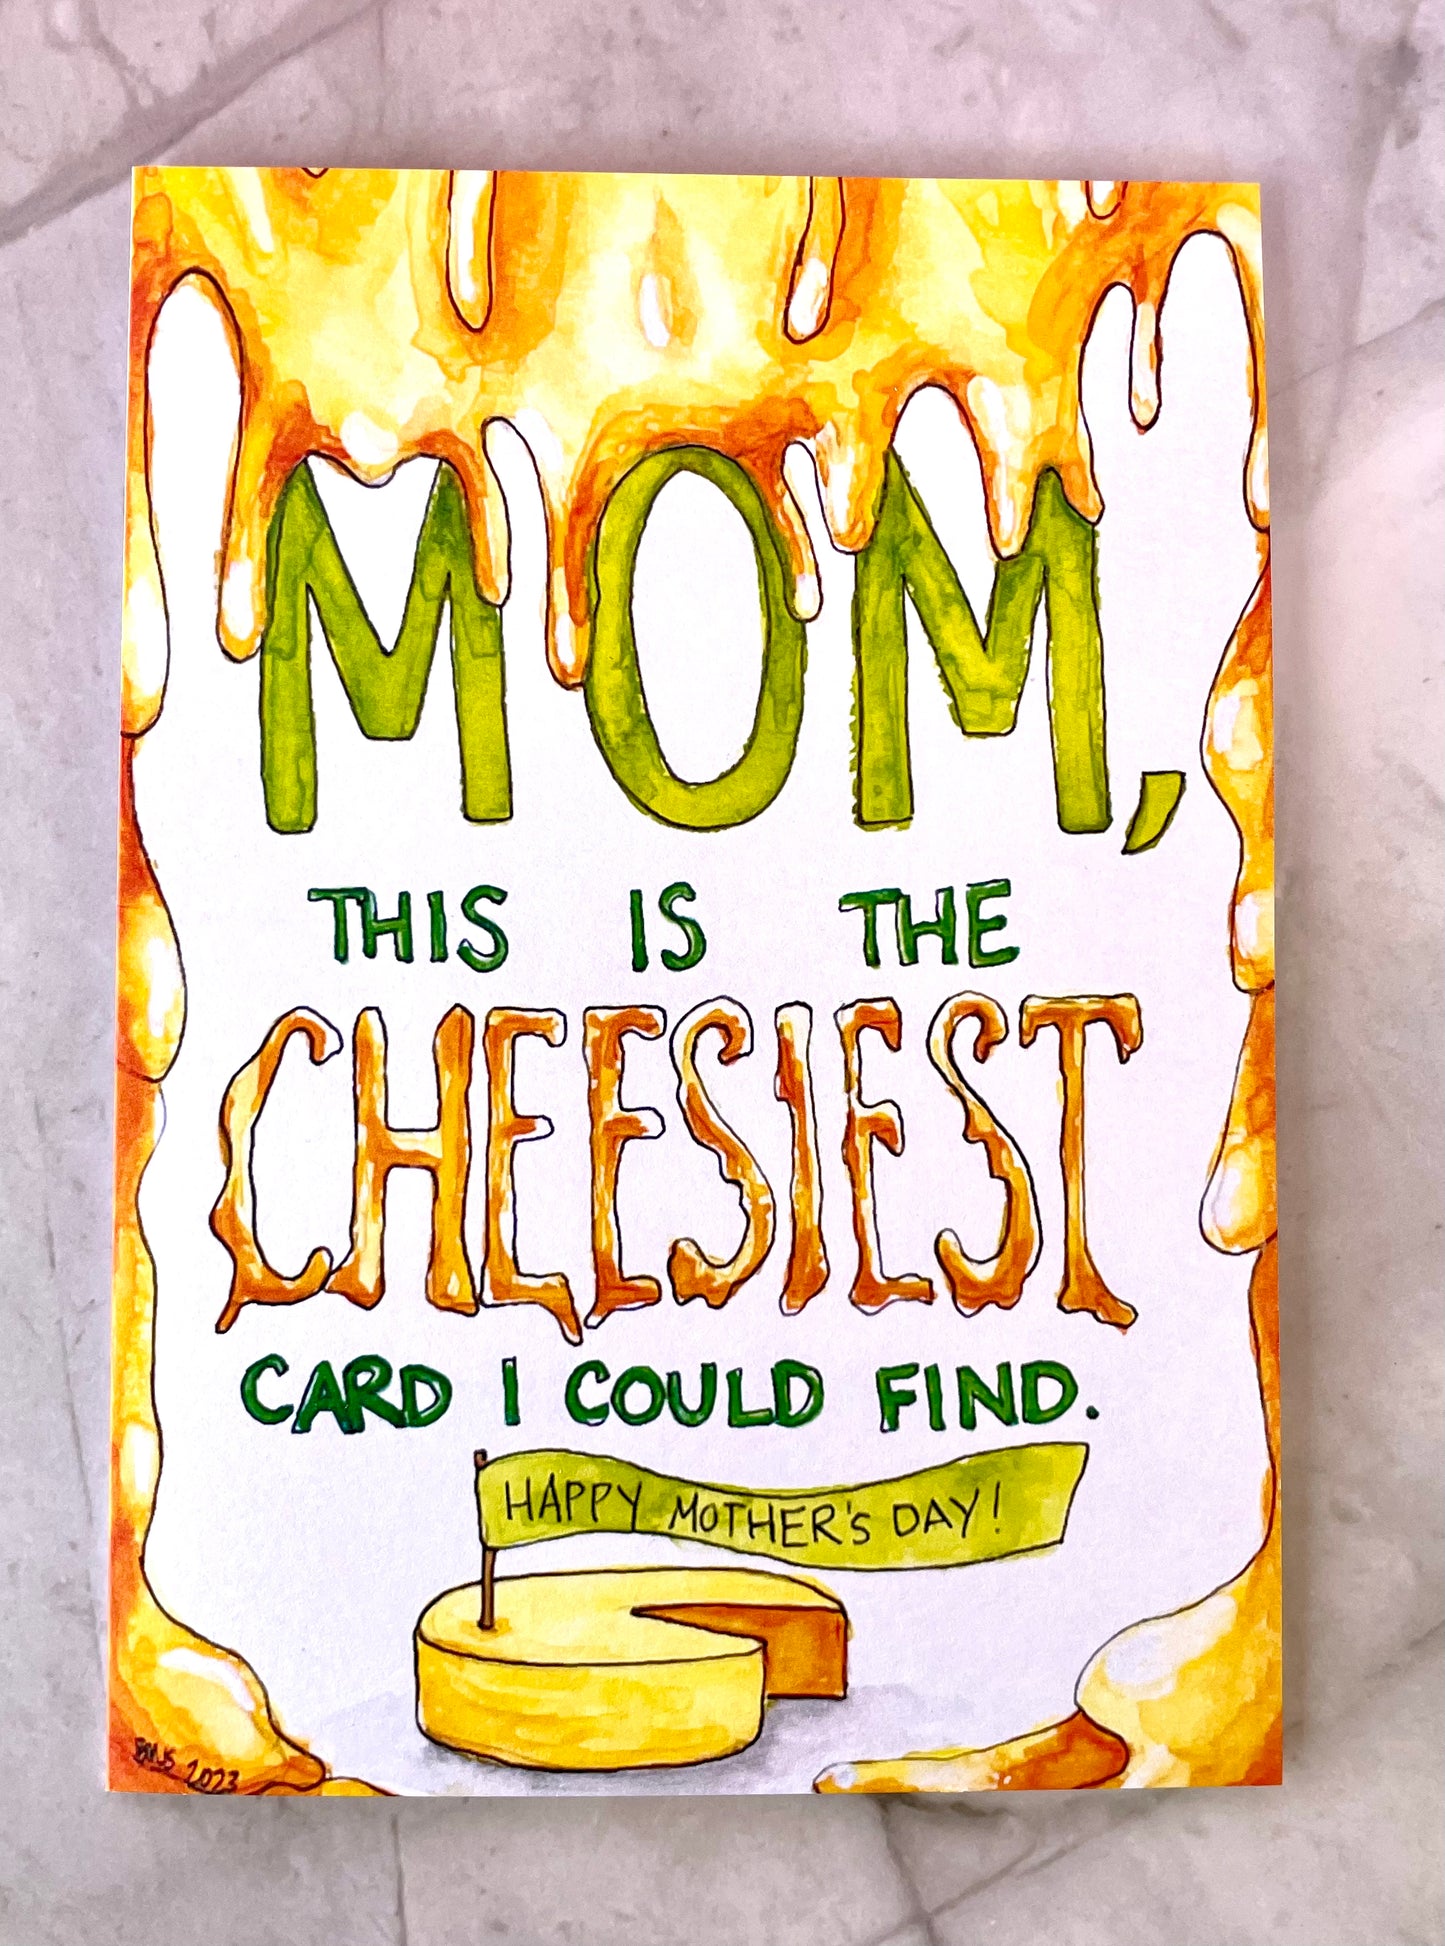 Cheesiest Mother’s Day Card